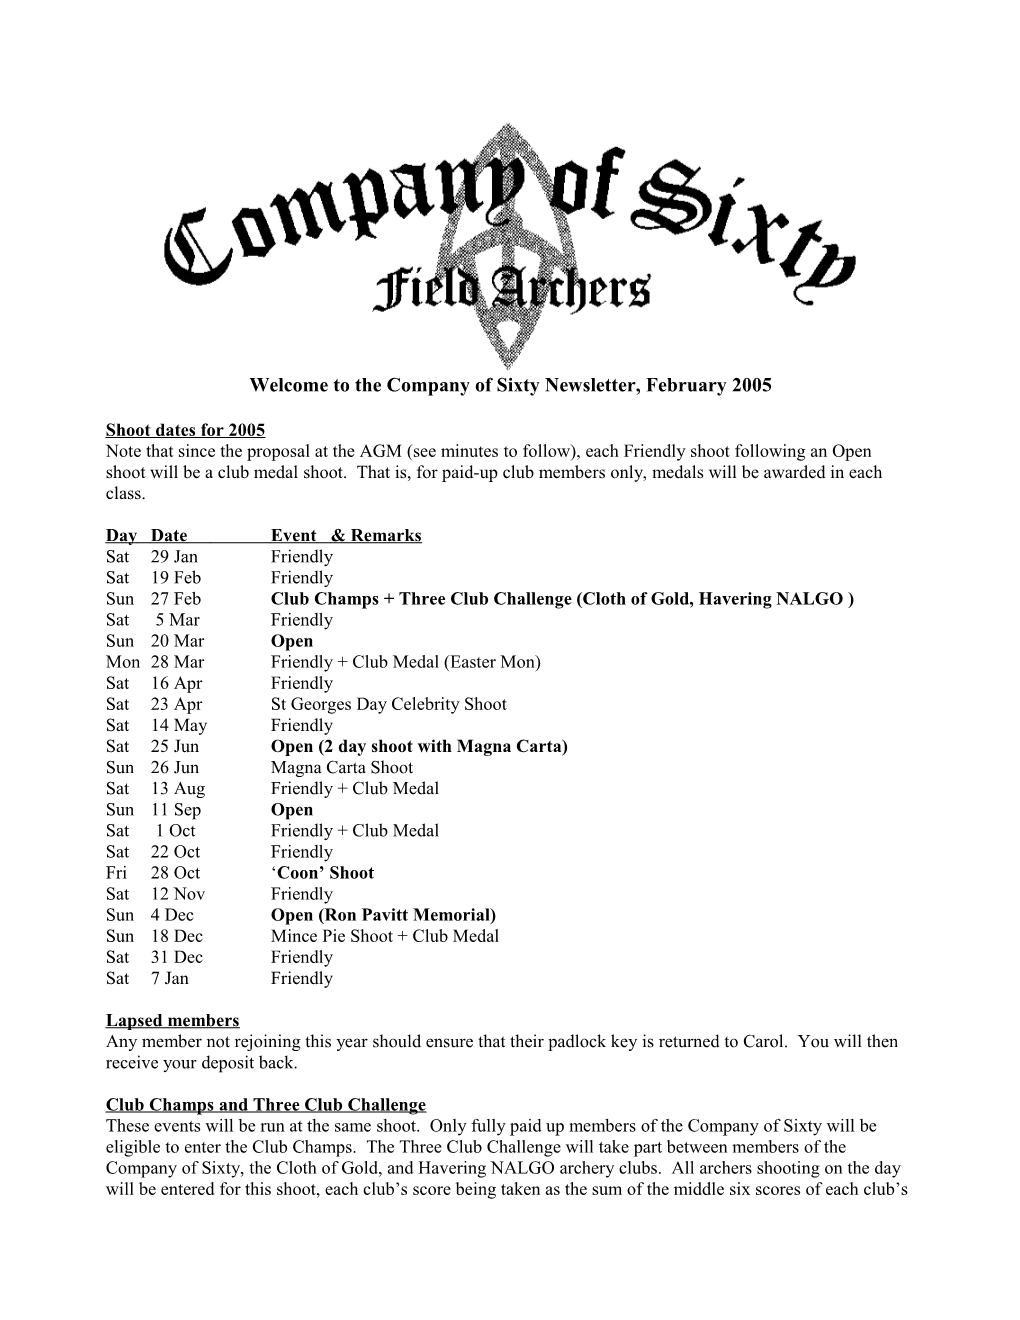 Welcome to the Company of Sixty Newsletter, February 2005